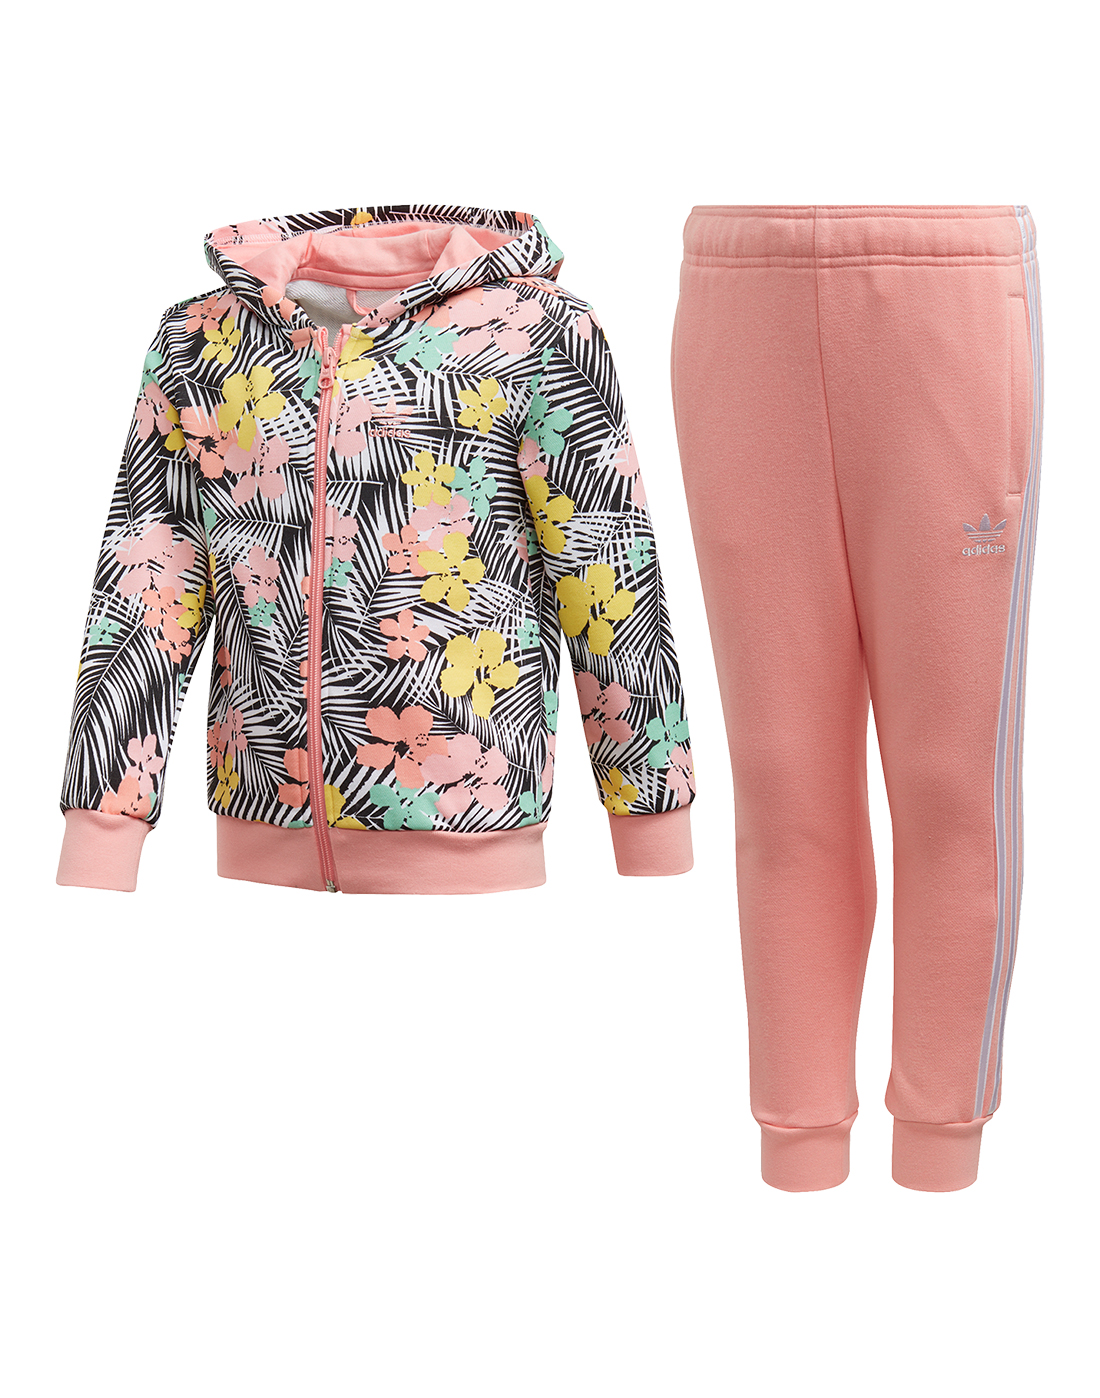 adidas Originals Younger Girls Hoodie Tracksuit - Pink | Life Style ...